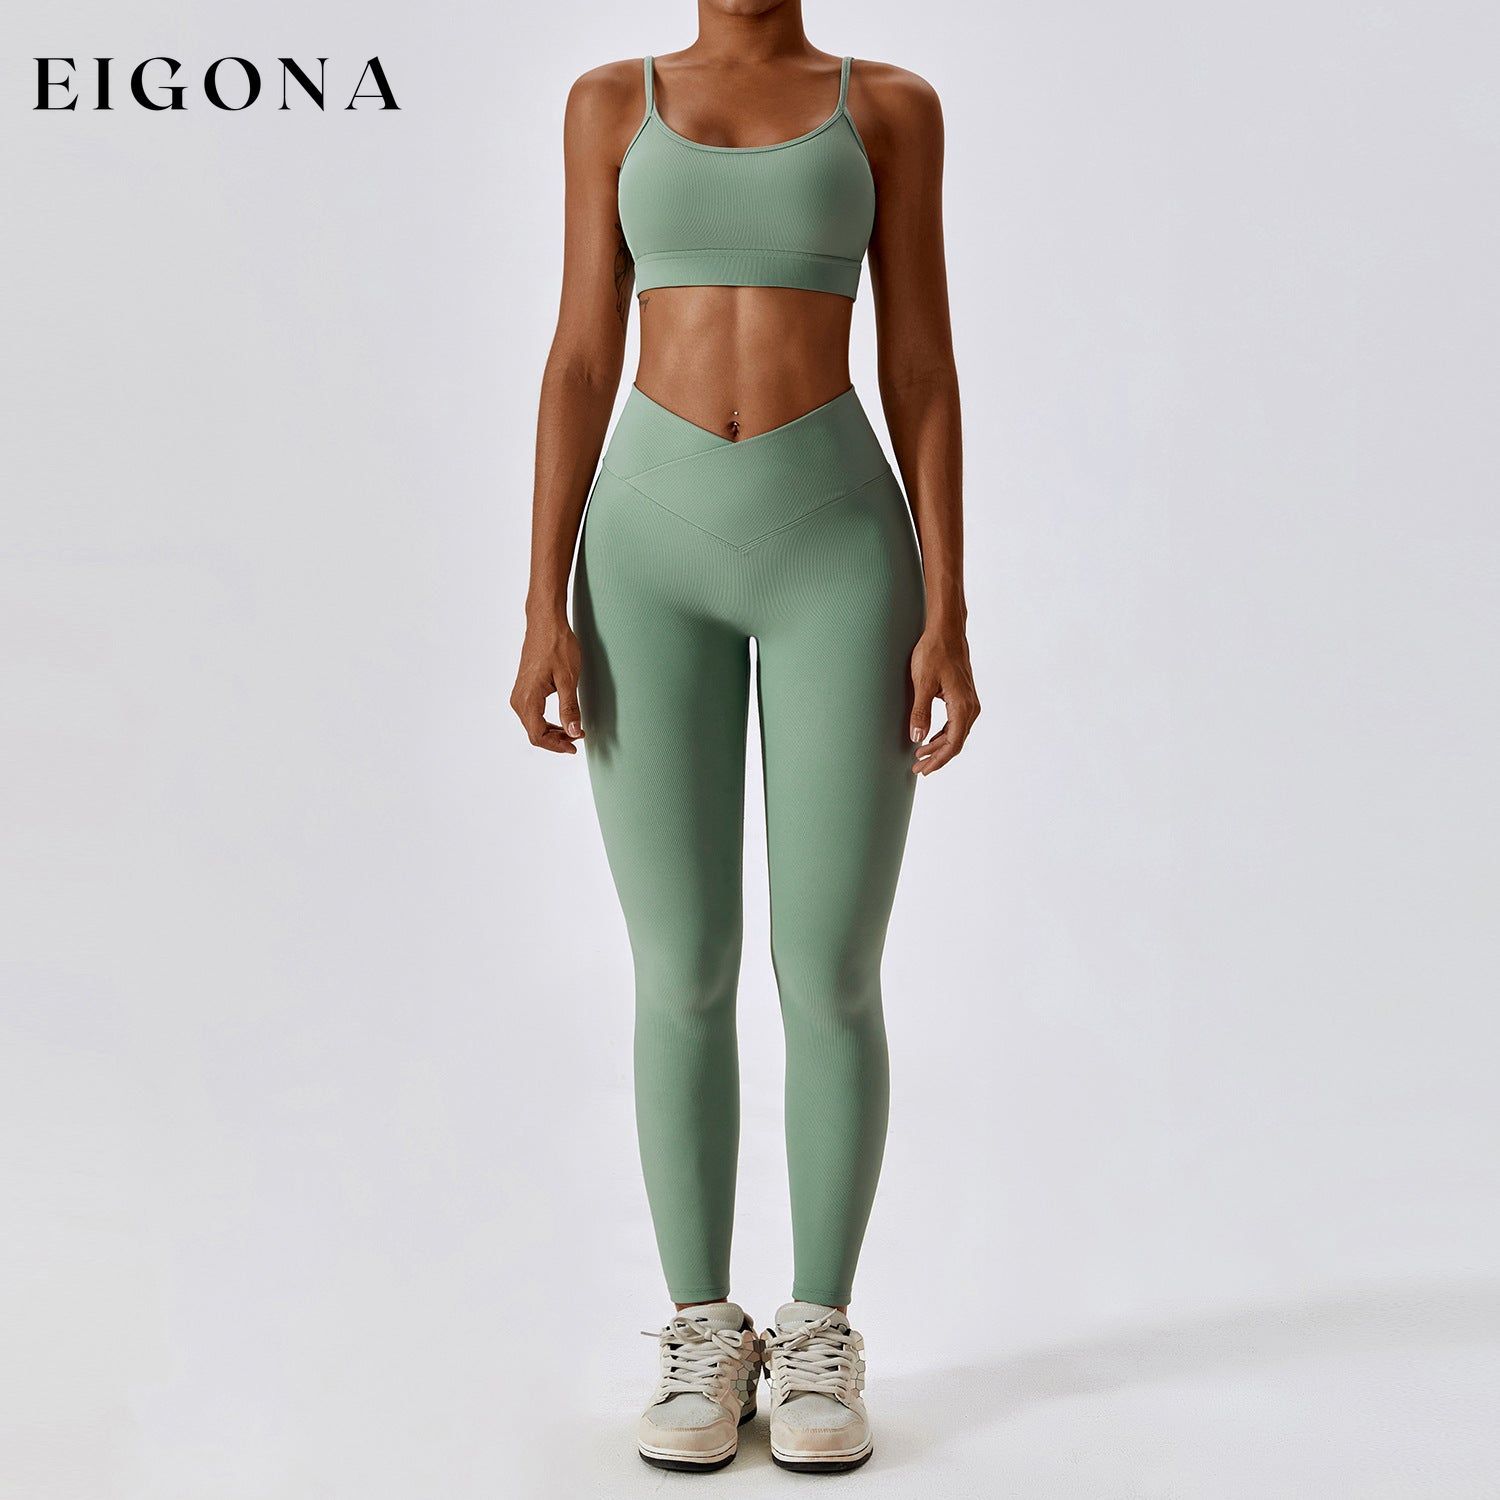 Thread Abdominal Shaping High Waist Beauty Back Yoga Suit Quick Drying Push up Hip Raise Skinny Workout Exercise Outfit -1 Bra Trousers Basil Green 2 piece activewear clothes set workout